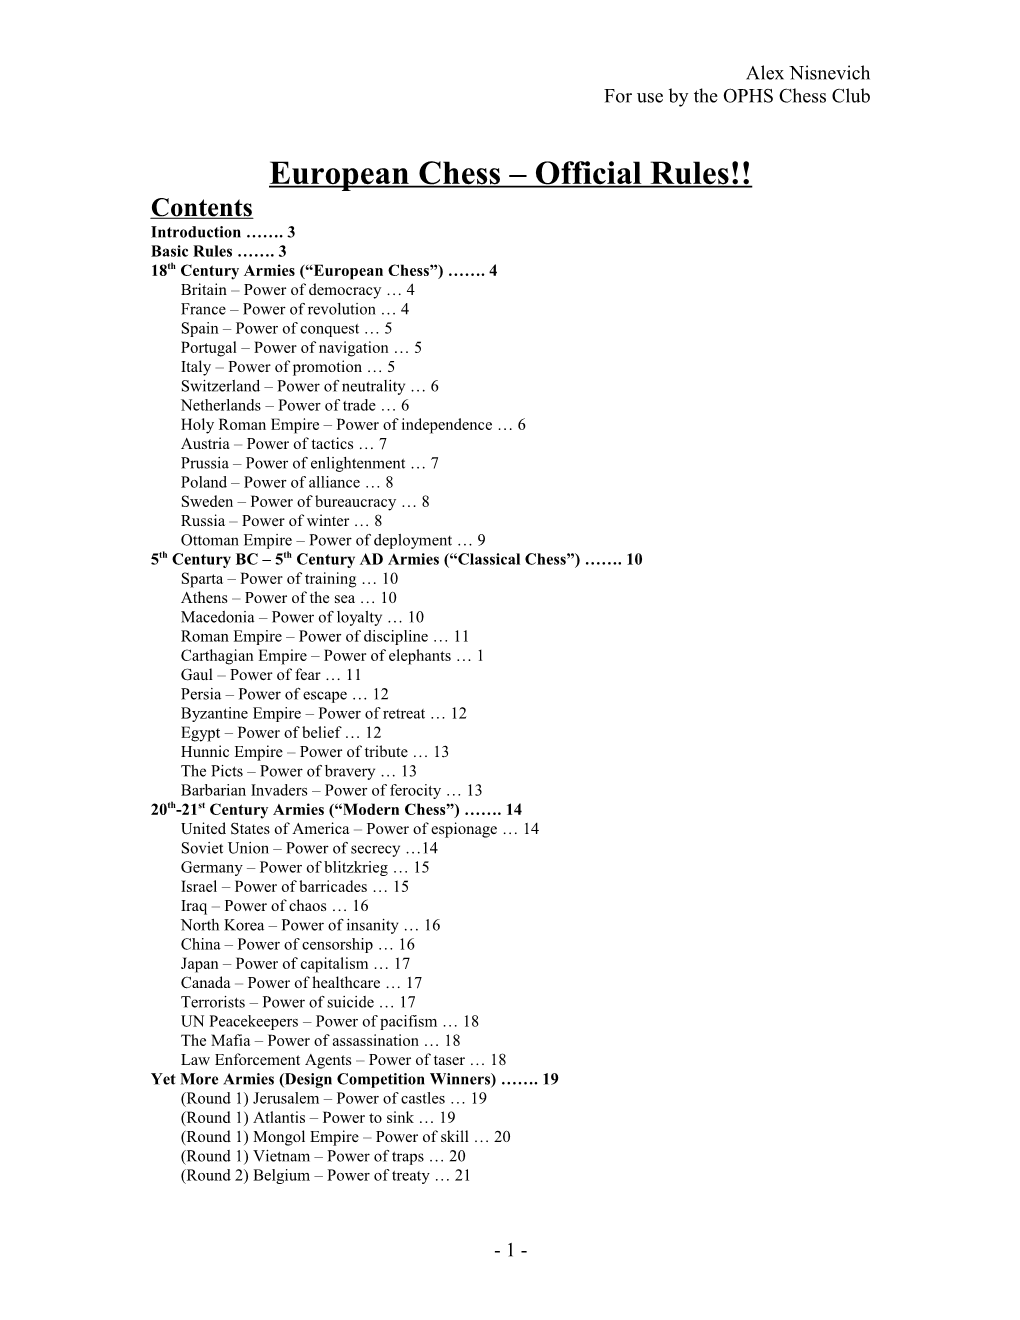 European Chess Official Rules